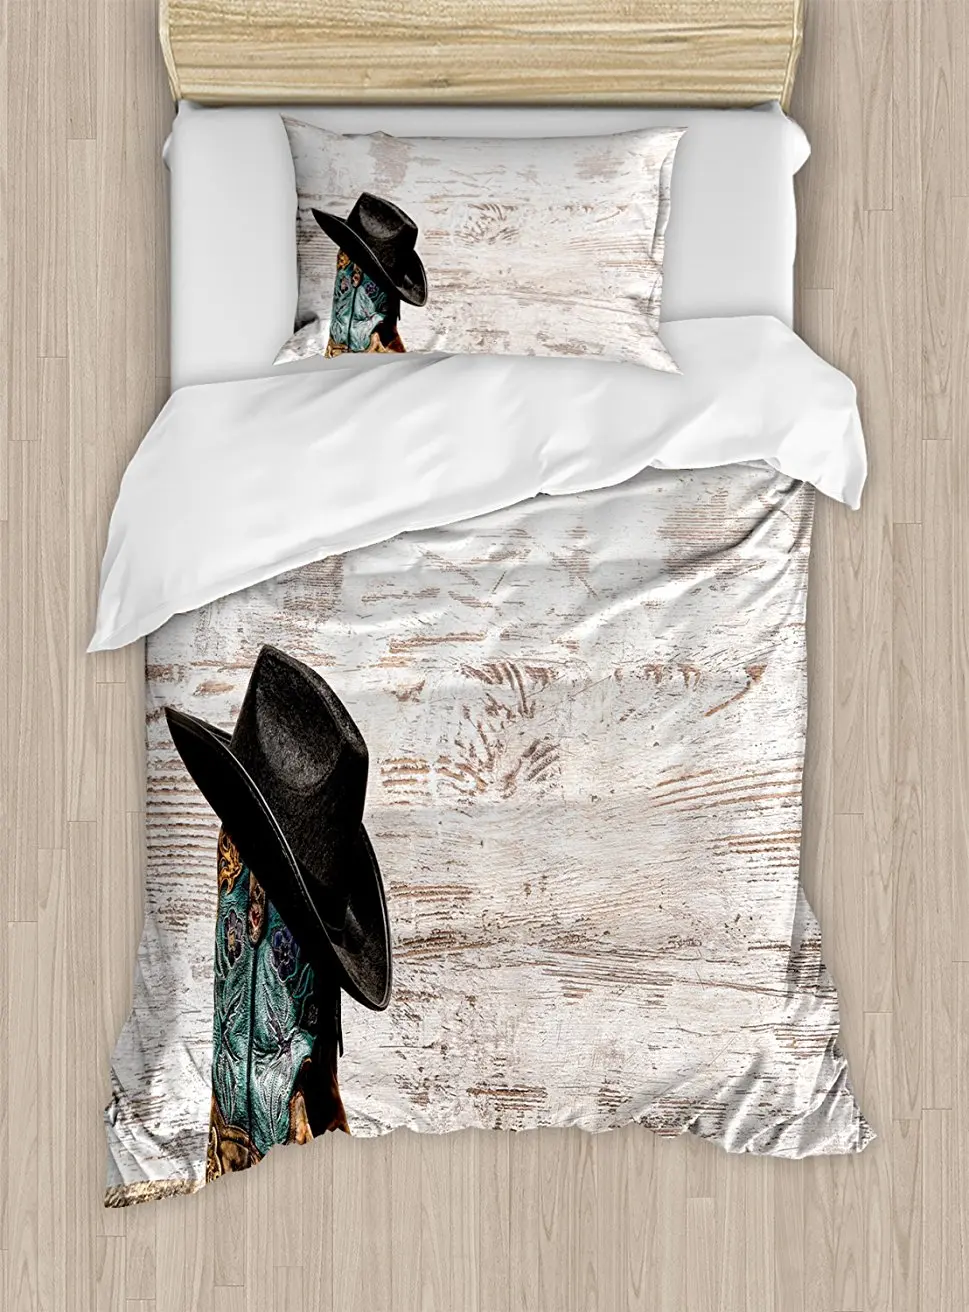 Фото Western Duvet Cover Set Traditional Rodeo Cowboy Hat and Cowgirl Boots Retro Grunge Background Decorative 4 Piece Bedding | Дом и сад